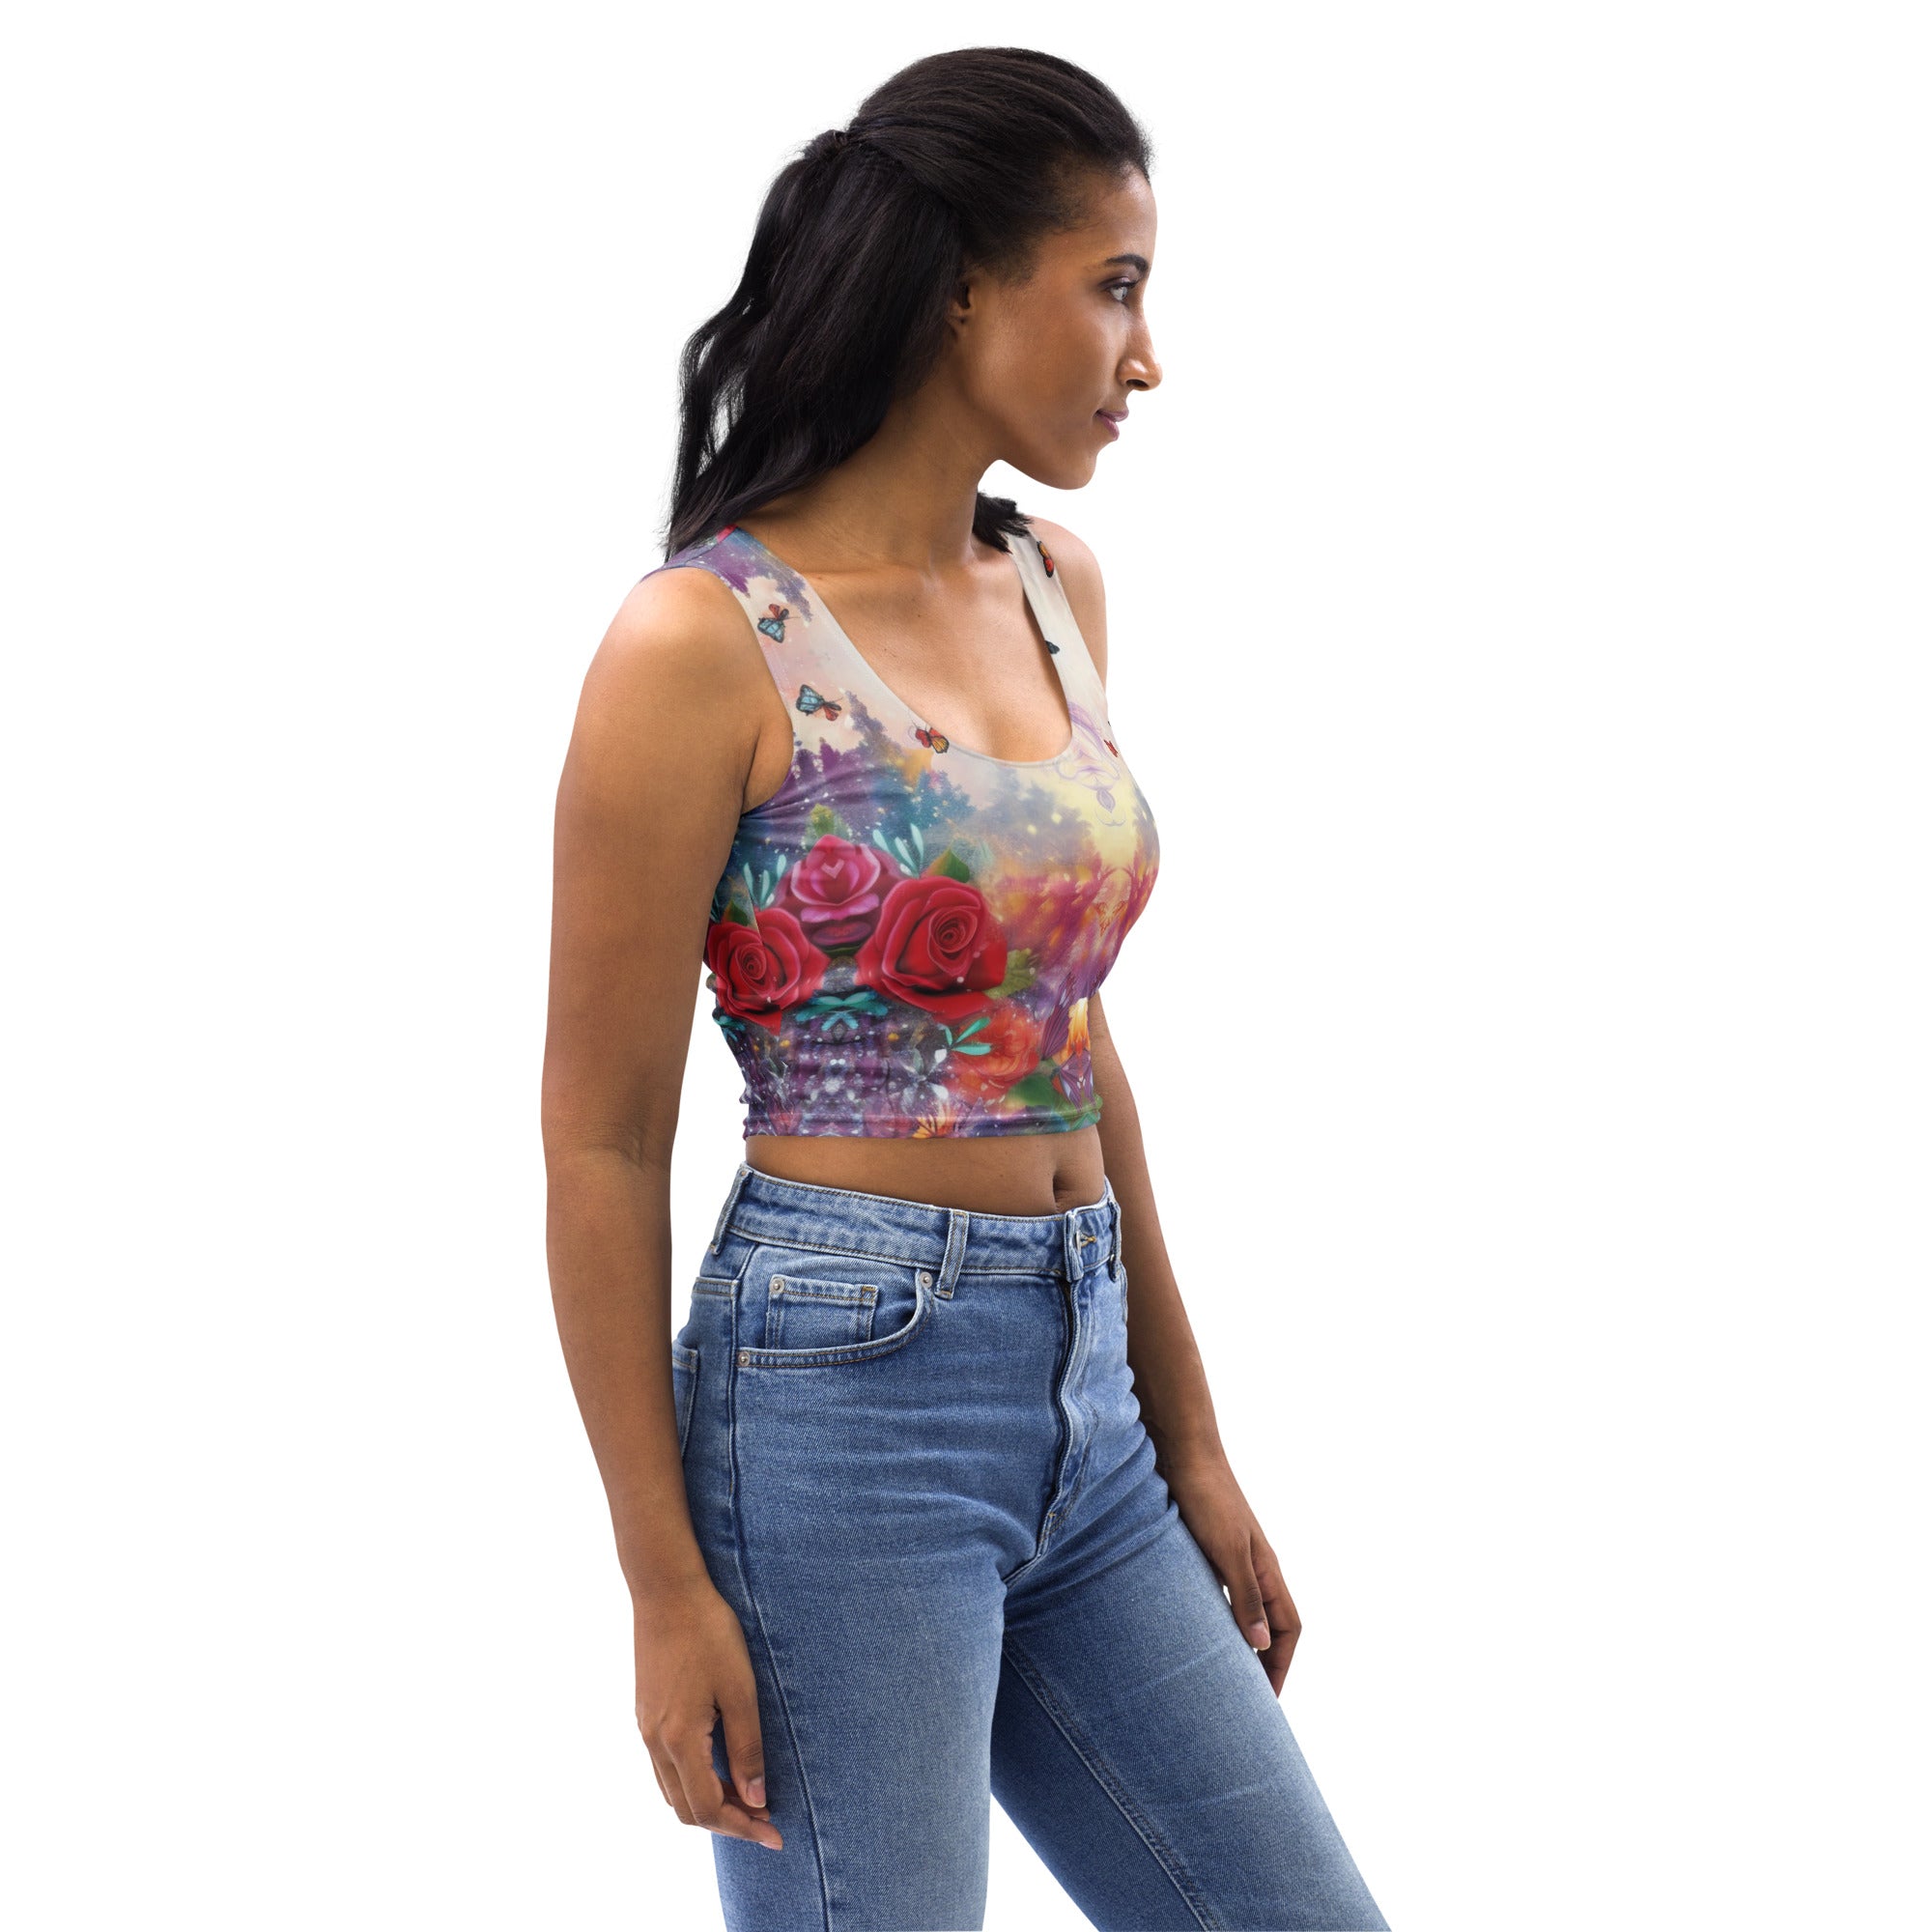 Ignite Your Feminine Spirit: Blossom with Style in our Flower Fairy Crop Top!